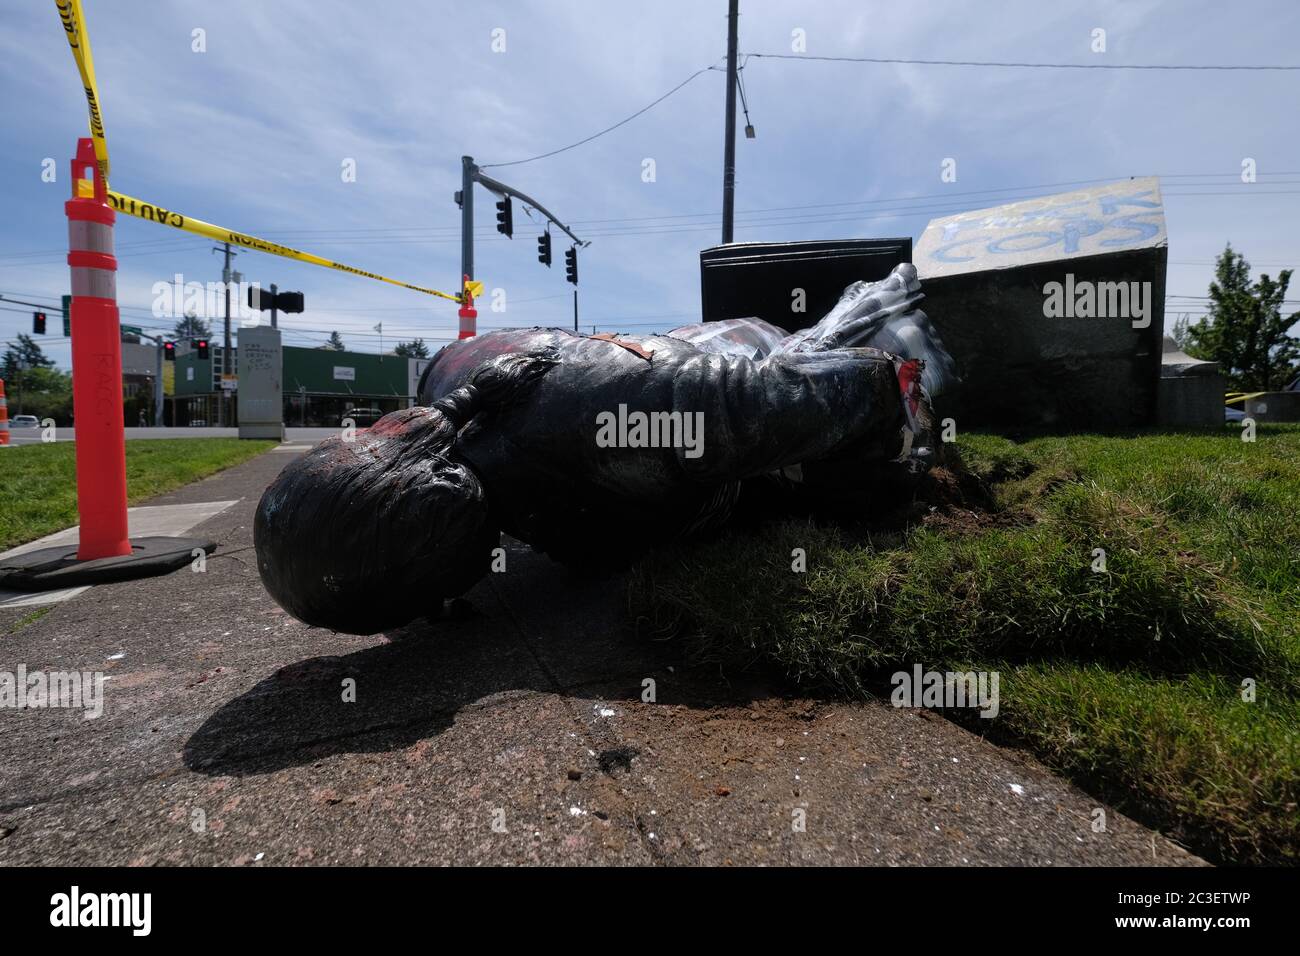 Portland, USA. 19th June, 2020. The George Washington statue at Northeast 57th and Sandy Boulevard is pictured on the ground in Portland, Ore., on June 19, 2020, after it was pulled down in the night. (Photo by Alex Milan Tracy/Sipa USA) Credit: Sipa USA/Alamy Live News Stock Photo